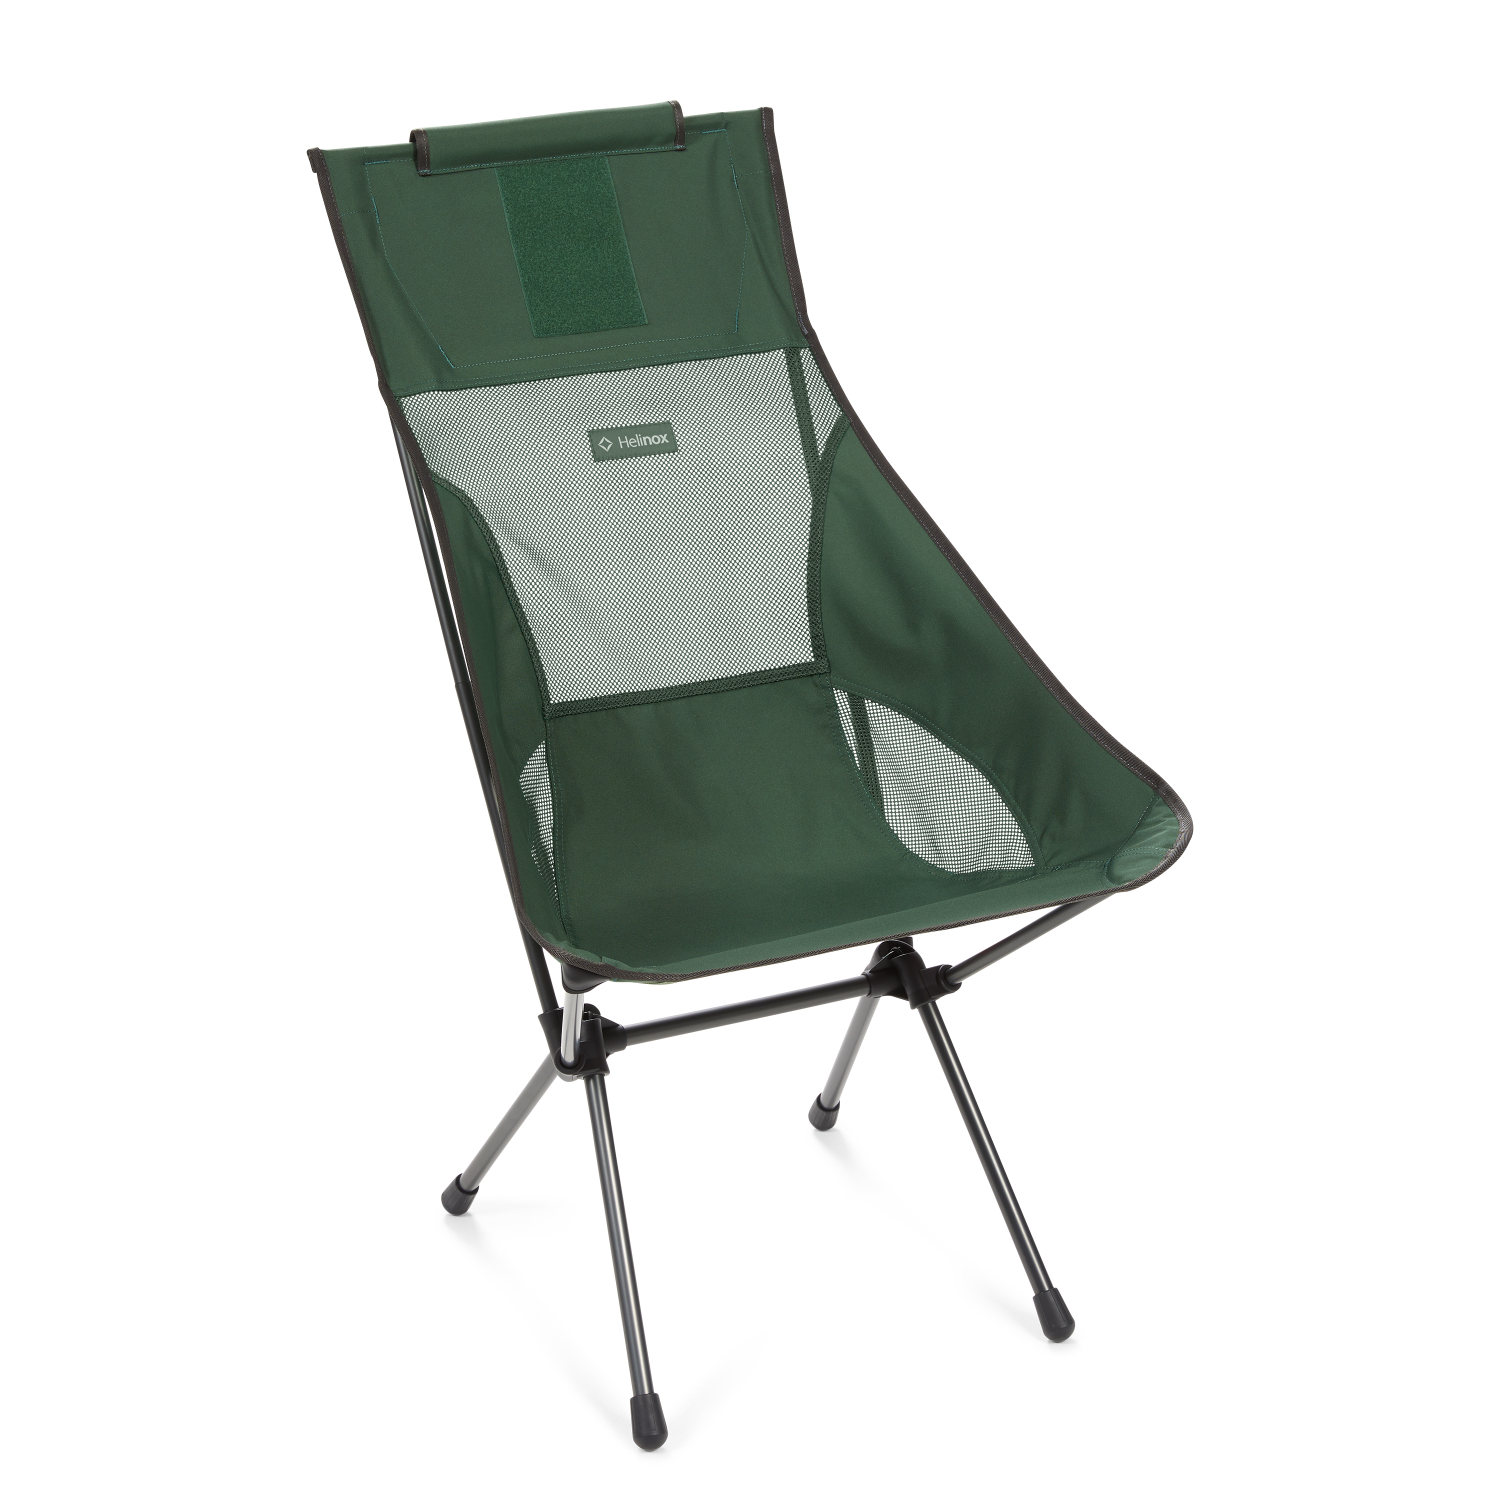 Helinox Sunset Chair Campingstuhl forest green